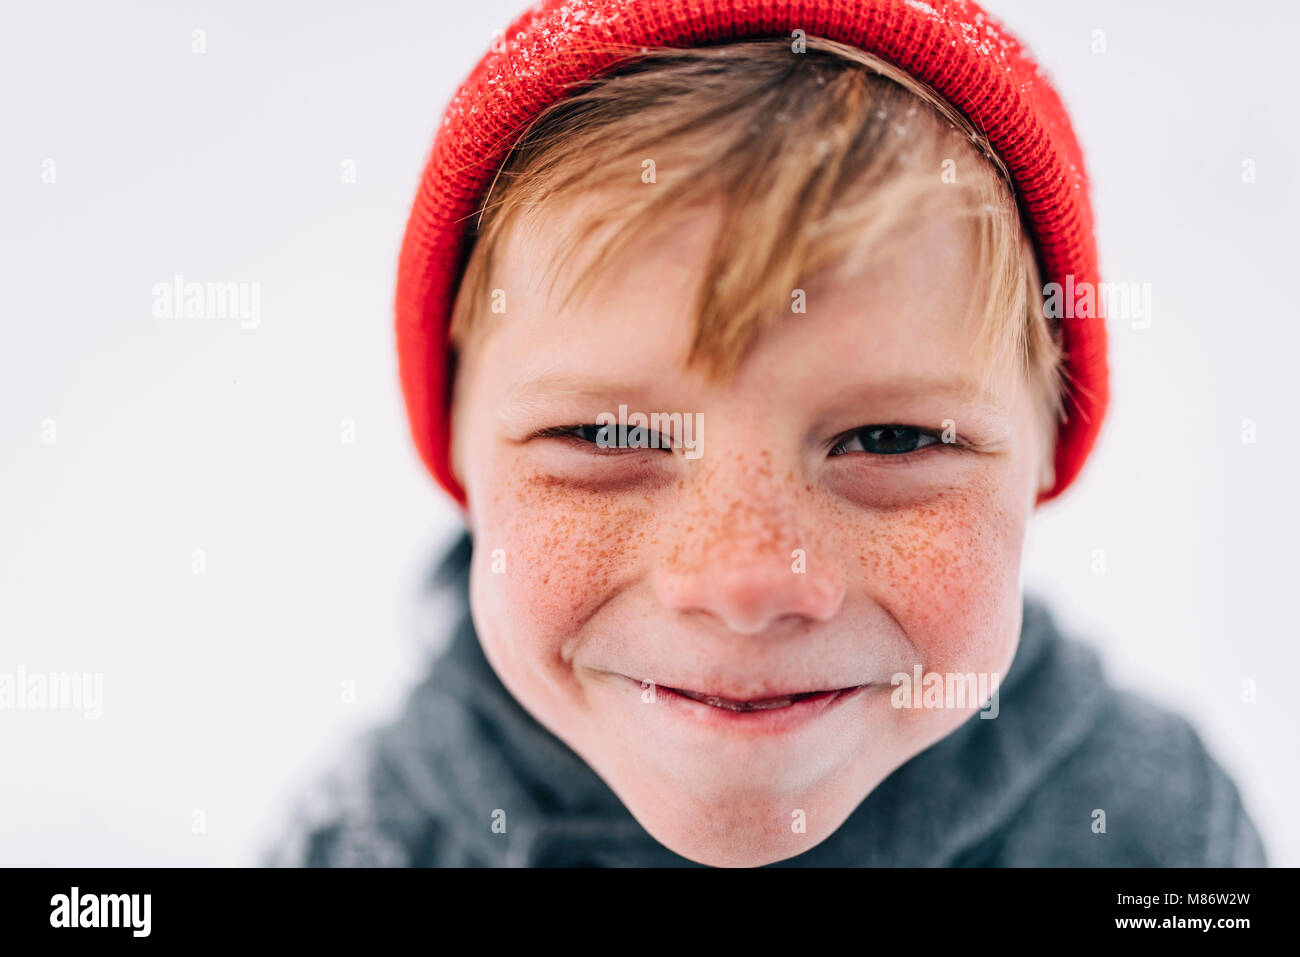 Portrait of a boy with freckles pulling funny faces Stock Photo